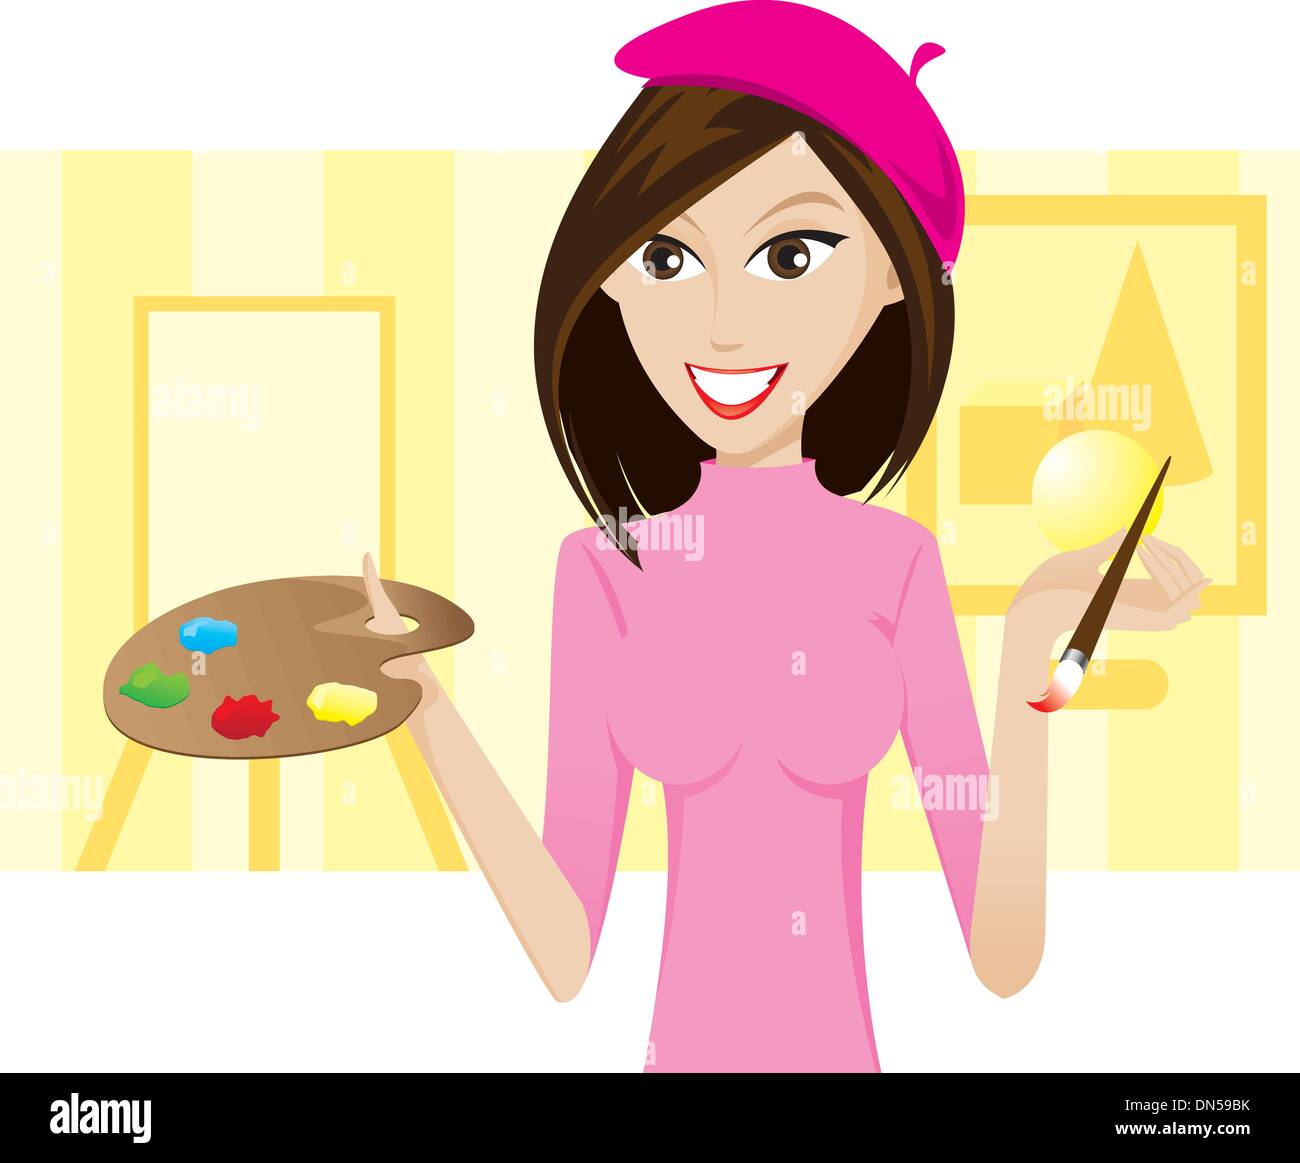 Female artist smiling Stock Vector Images - Alamy